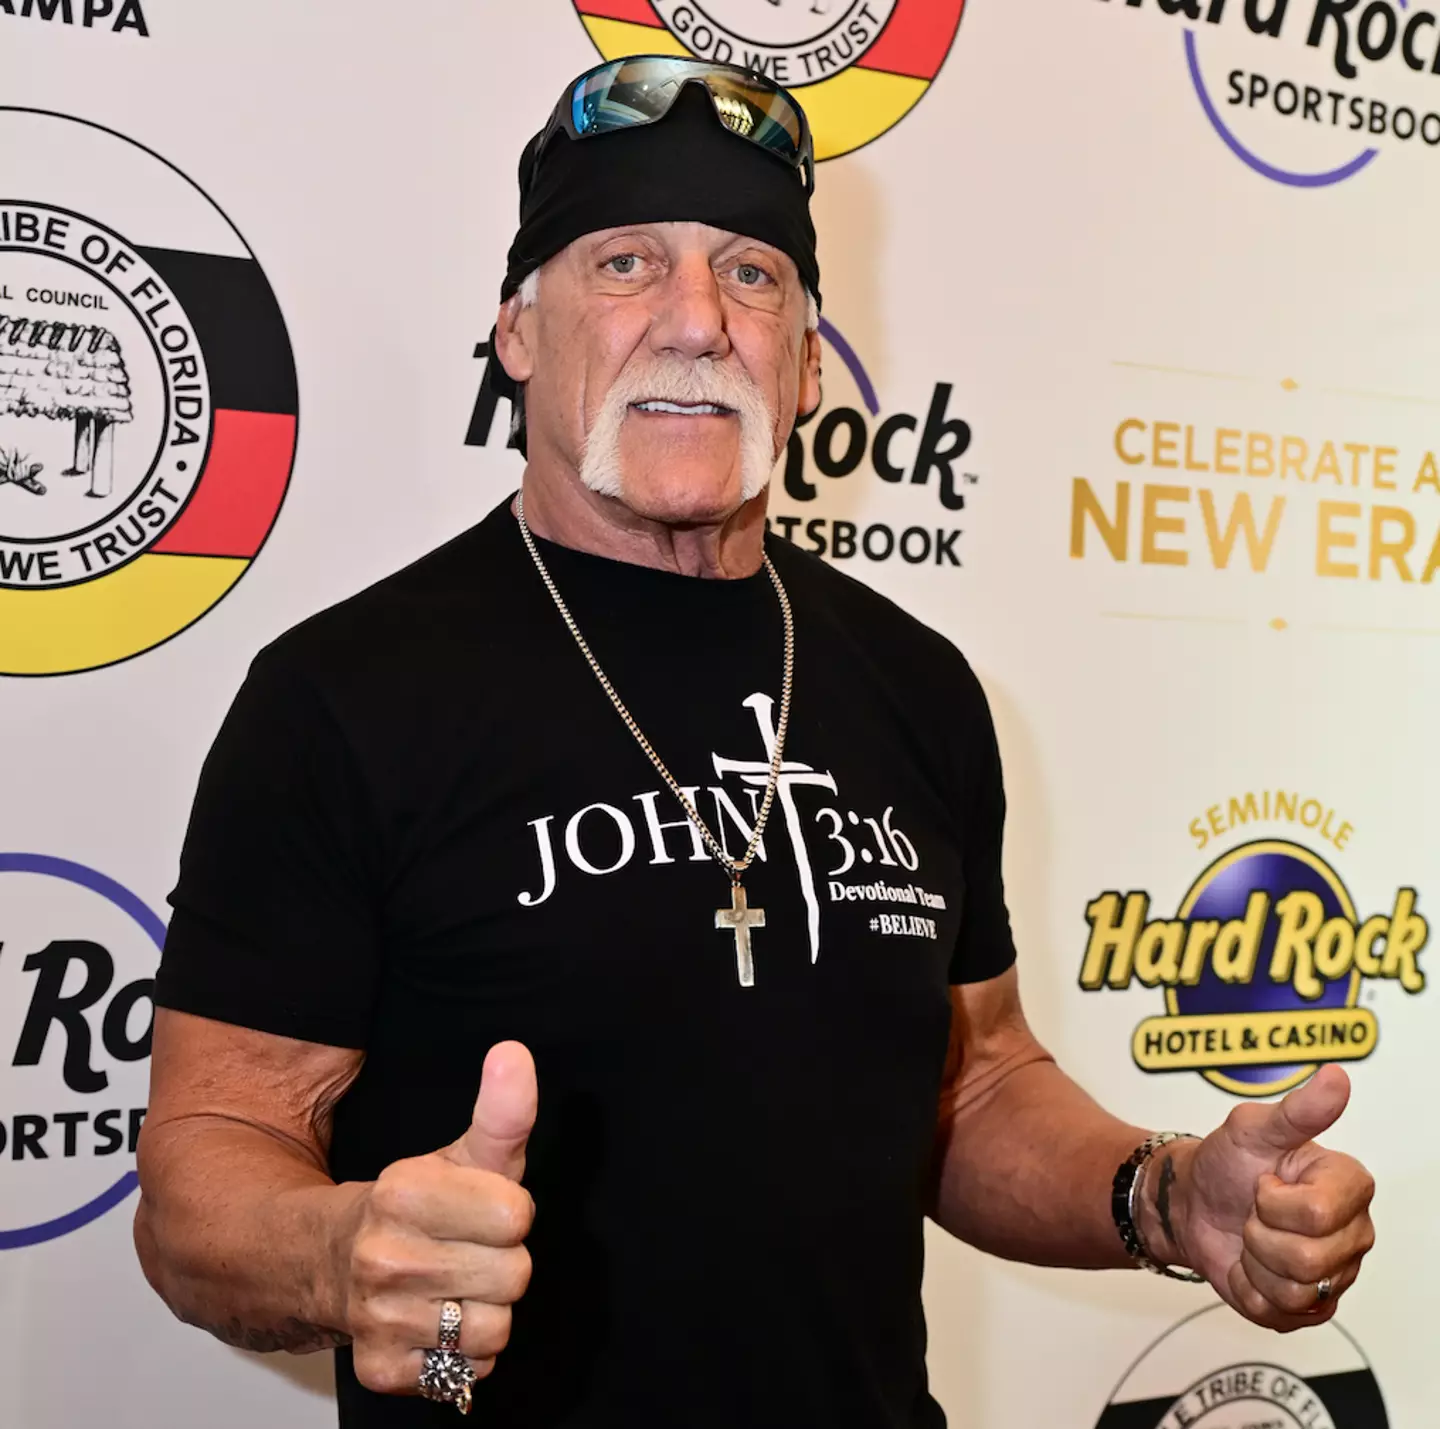 Hulk Hogan, his wife and a friend, were driving in Tampa, Florida, when they witnessed a car crash.